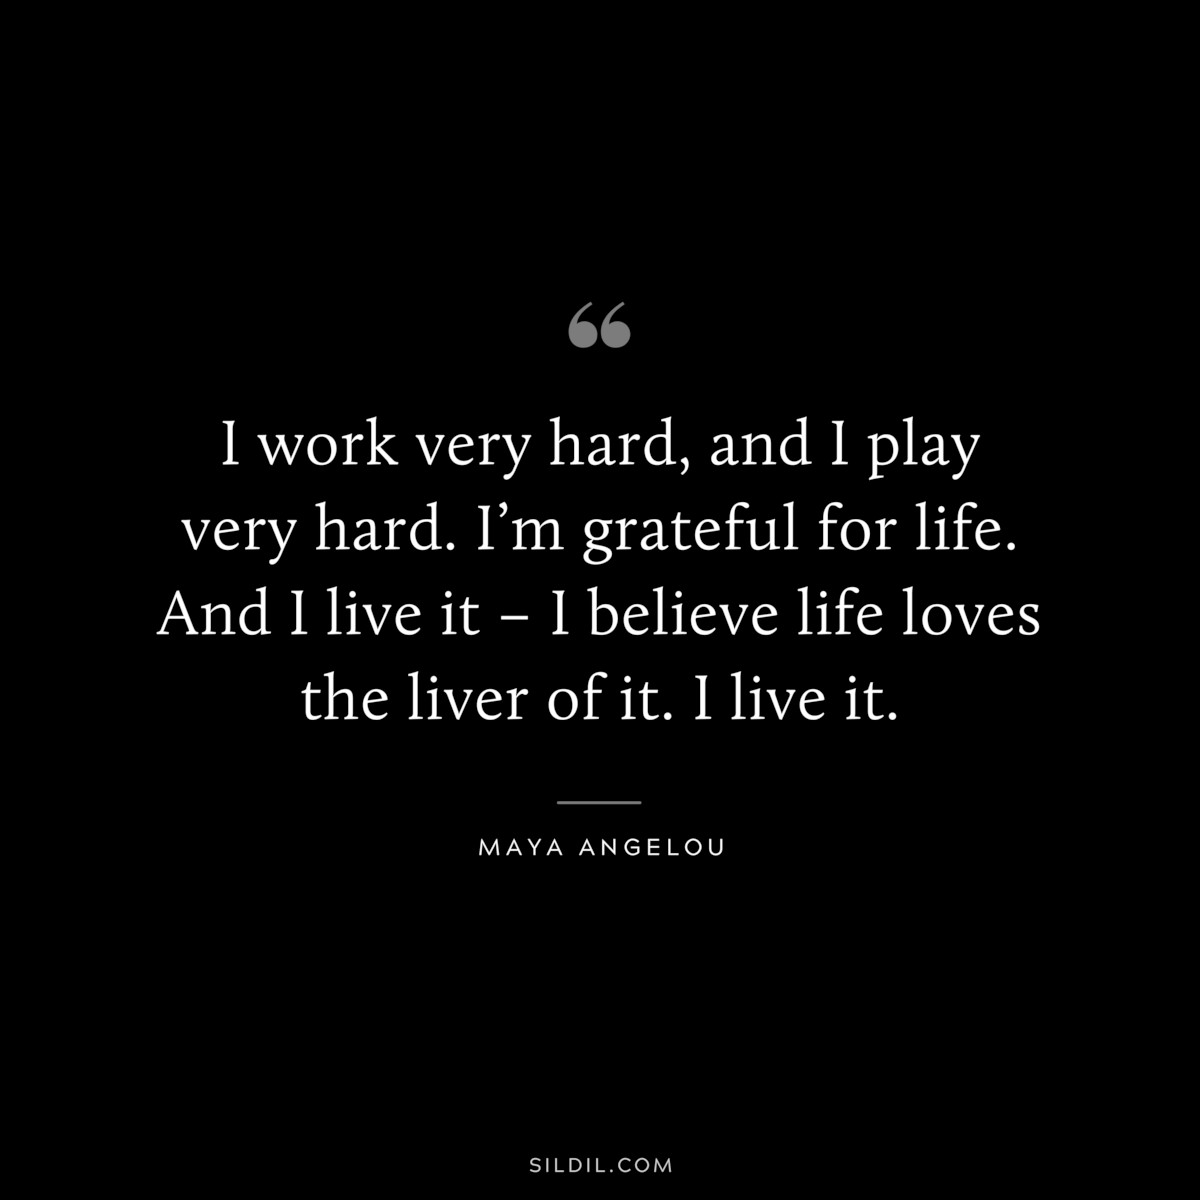 I work very hard, and I play very hard. I’m grateful for life. And I live it – I believe life loves the liver of it. I live it. ― Maya Angelou